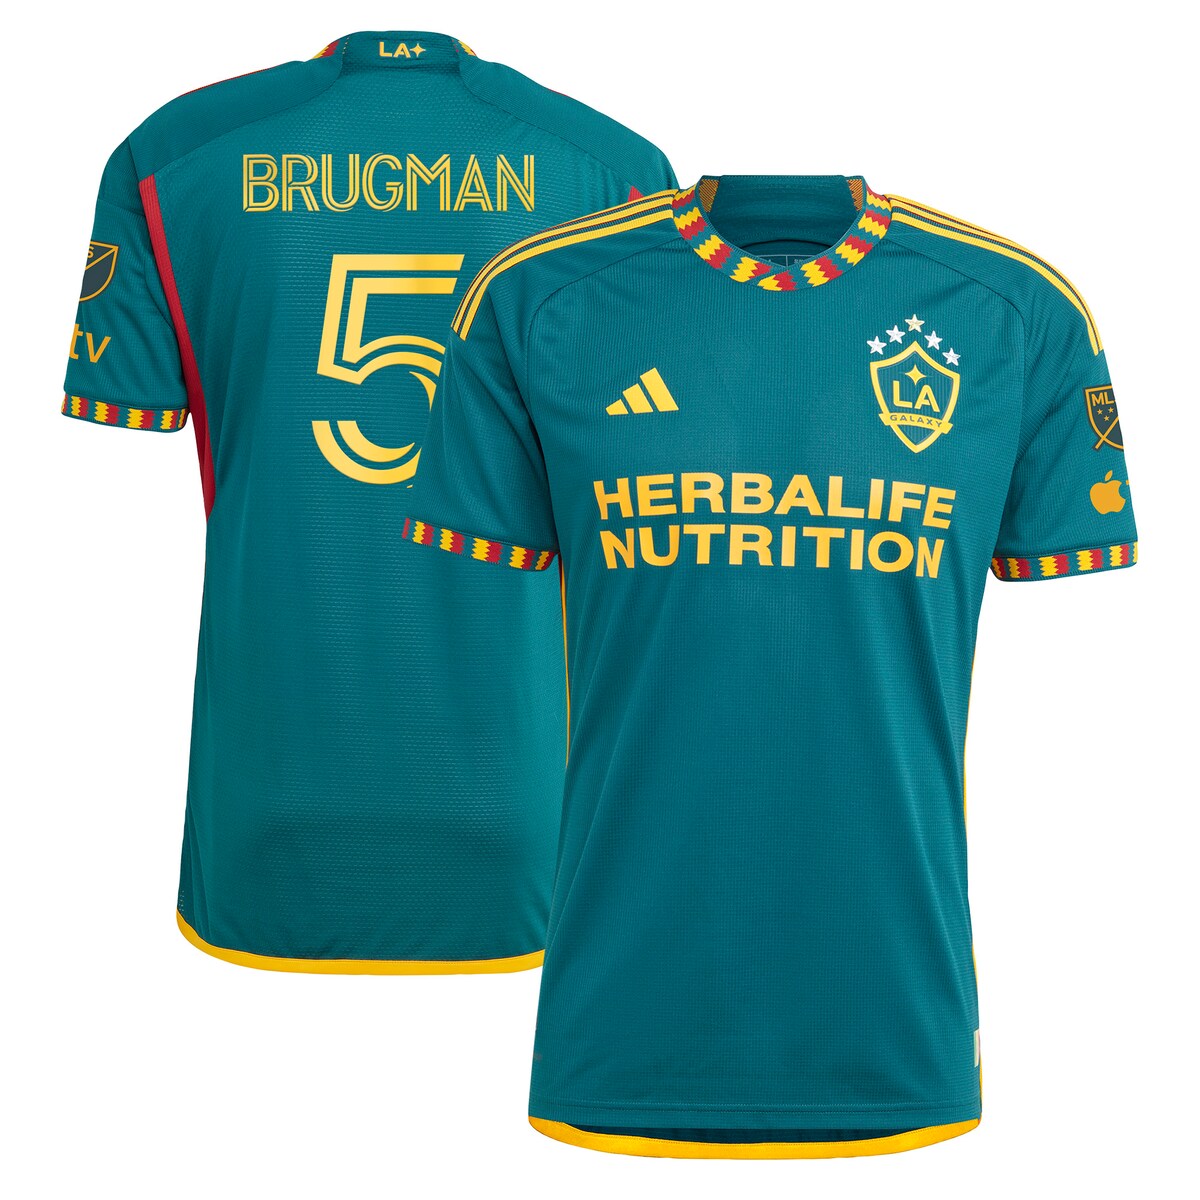 Look and feel like the real deal when you add this Gastn Brugman 2023 LA Kit Authentic Player Jersey to your LA Galaxy collection. The LA kit honors the city of Los Angeles and its history by embracing the City flag. Coated in city colors, the kit represents all of the different Angelino cultures, no matter what border or bridge you crossed to get here, this will forever be your home. This adidas gear features AEROREADY technology and ventilated, mesh panels that work together to keep you dry and comfortable all game long. Its exciting LA Galaxy graphics will motivate you to cheer on your favorite team as they take the pitch.Material: 100% PolyesterOfficially licensedAEROREADY technology absorbs moisture and makes you feel dryMachine wash, tumble dry lowEmbroidered adidas logo on right chestBrand: adidasTagless collar for added comfortSewn on embroidered team crest on left chestVentilated mesh panel insertsImportedHeat-sealed sponsor logo on chestBackneck taping - no irritating stitch on the backAuthentic Jersey